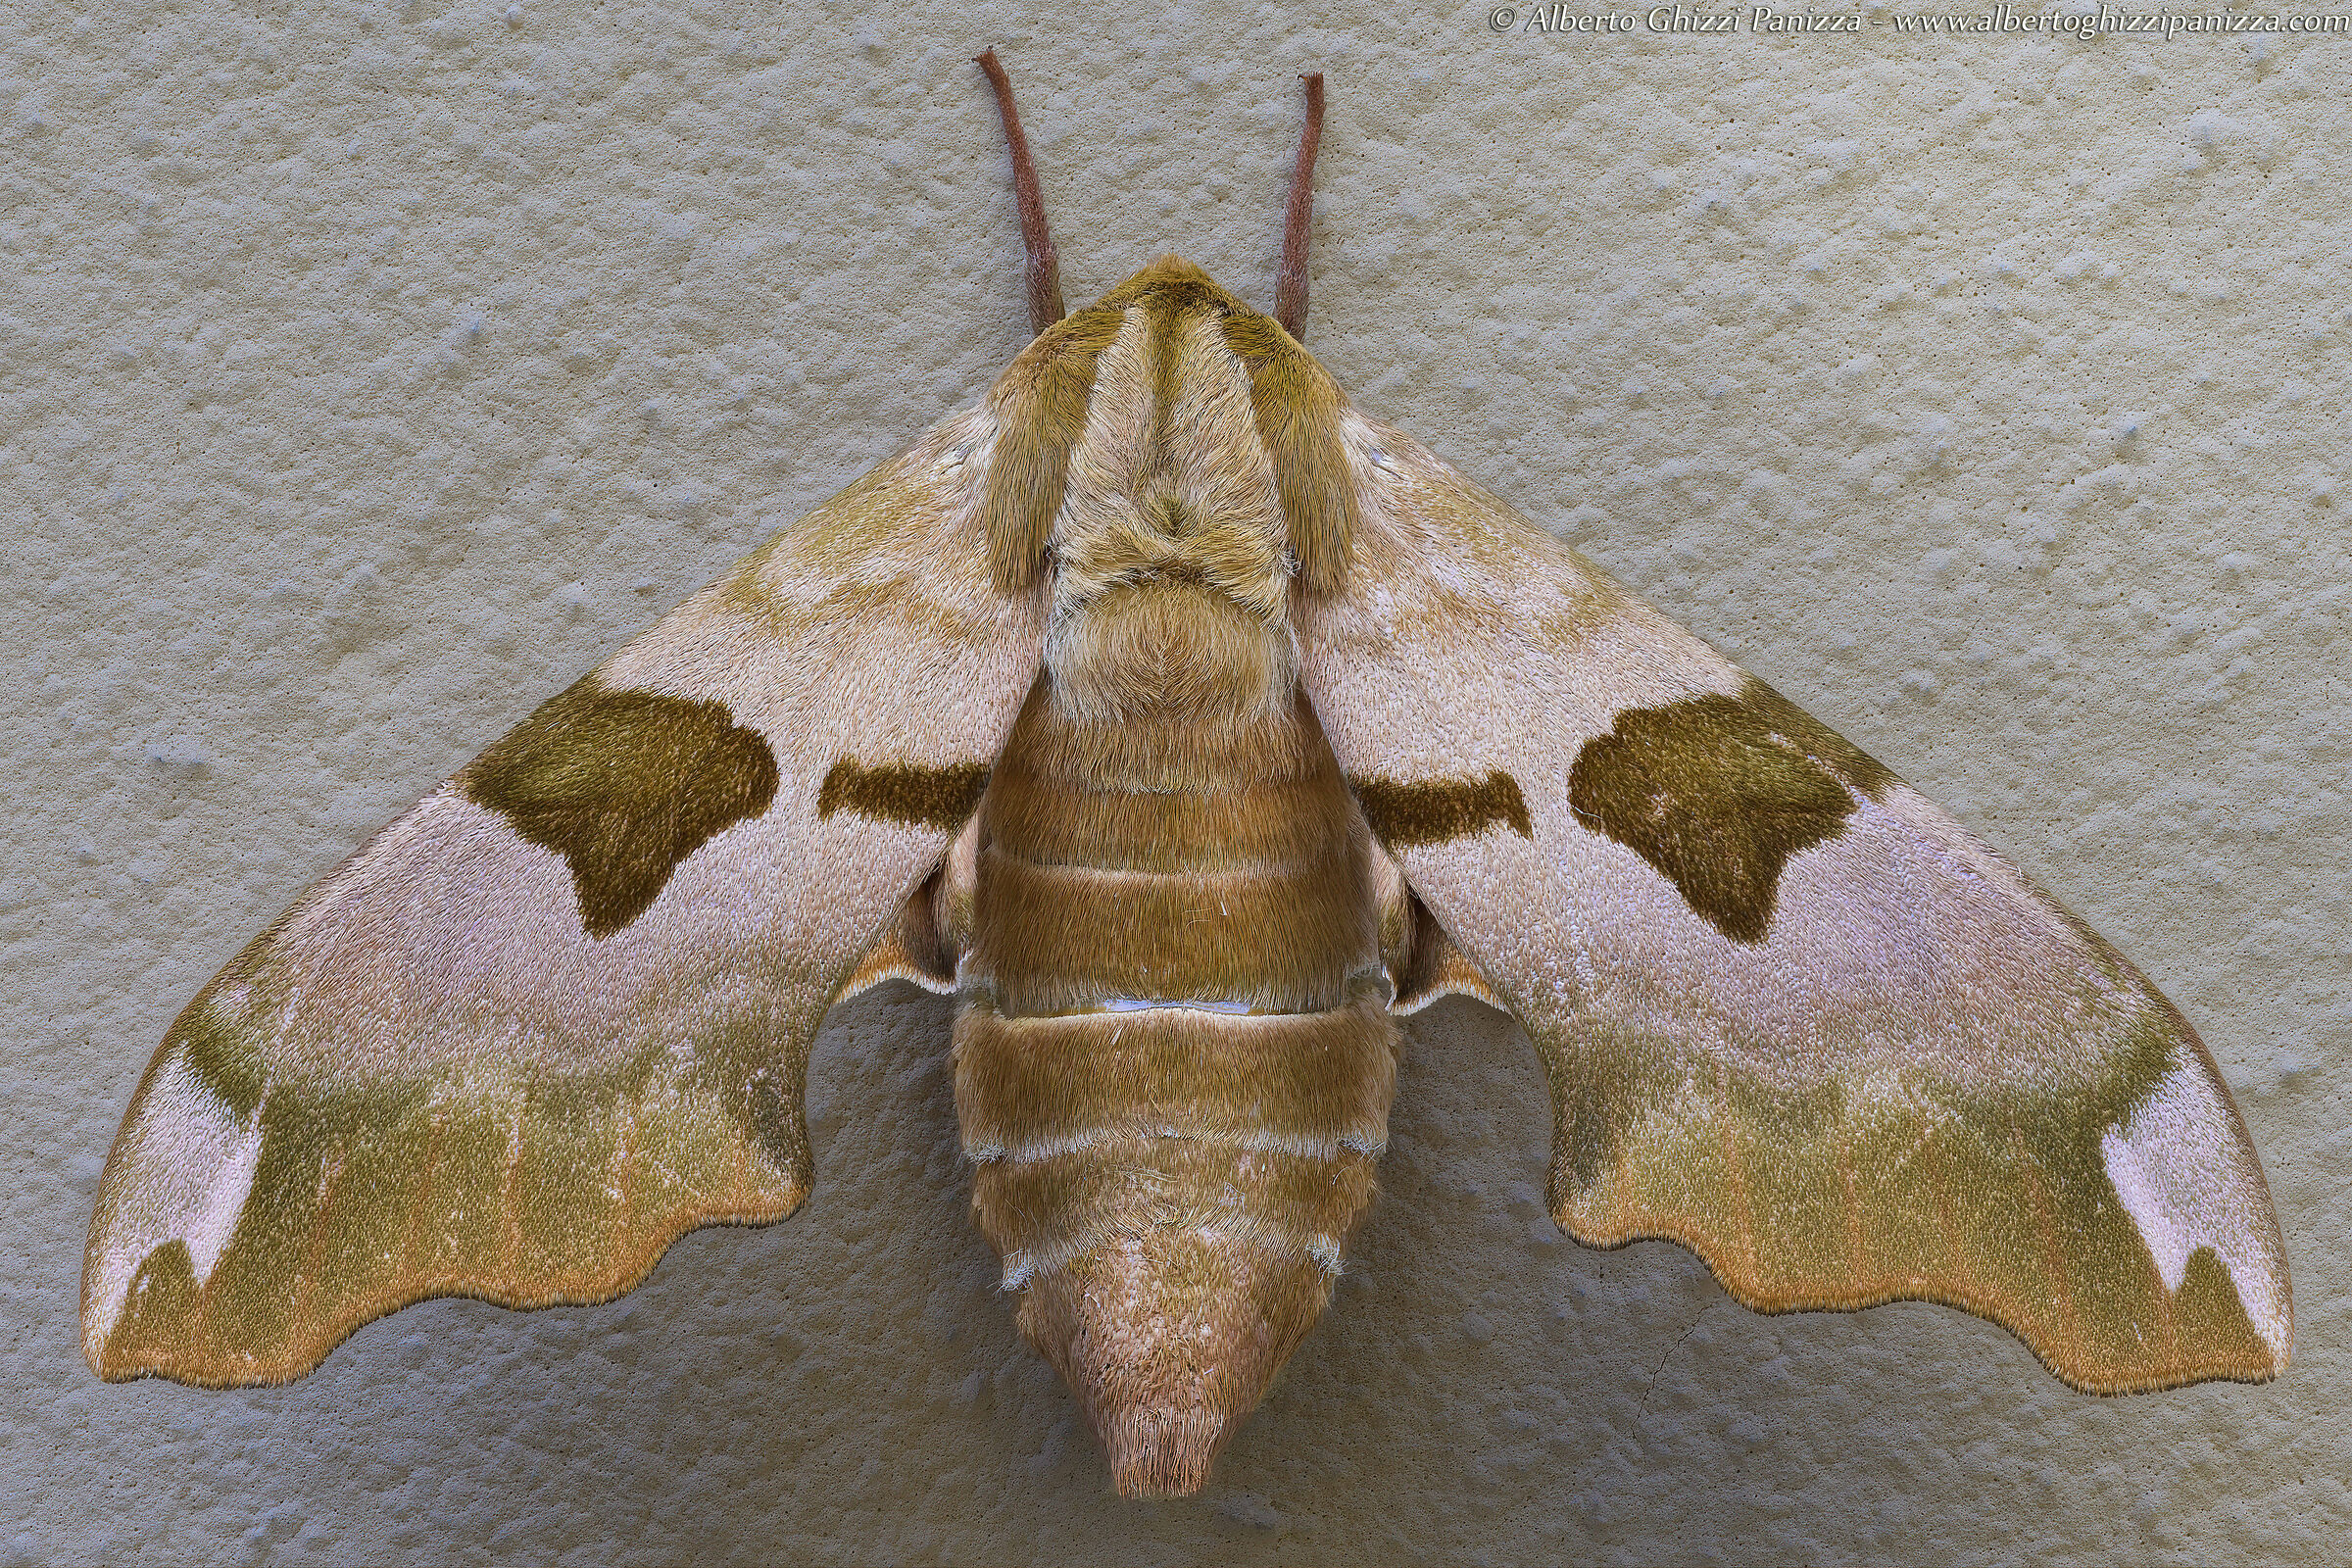 First tests with the Nikkor Z MC 105mm f/2.8 VR S -moth...